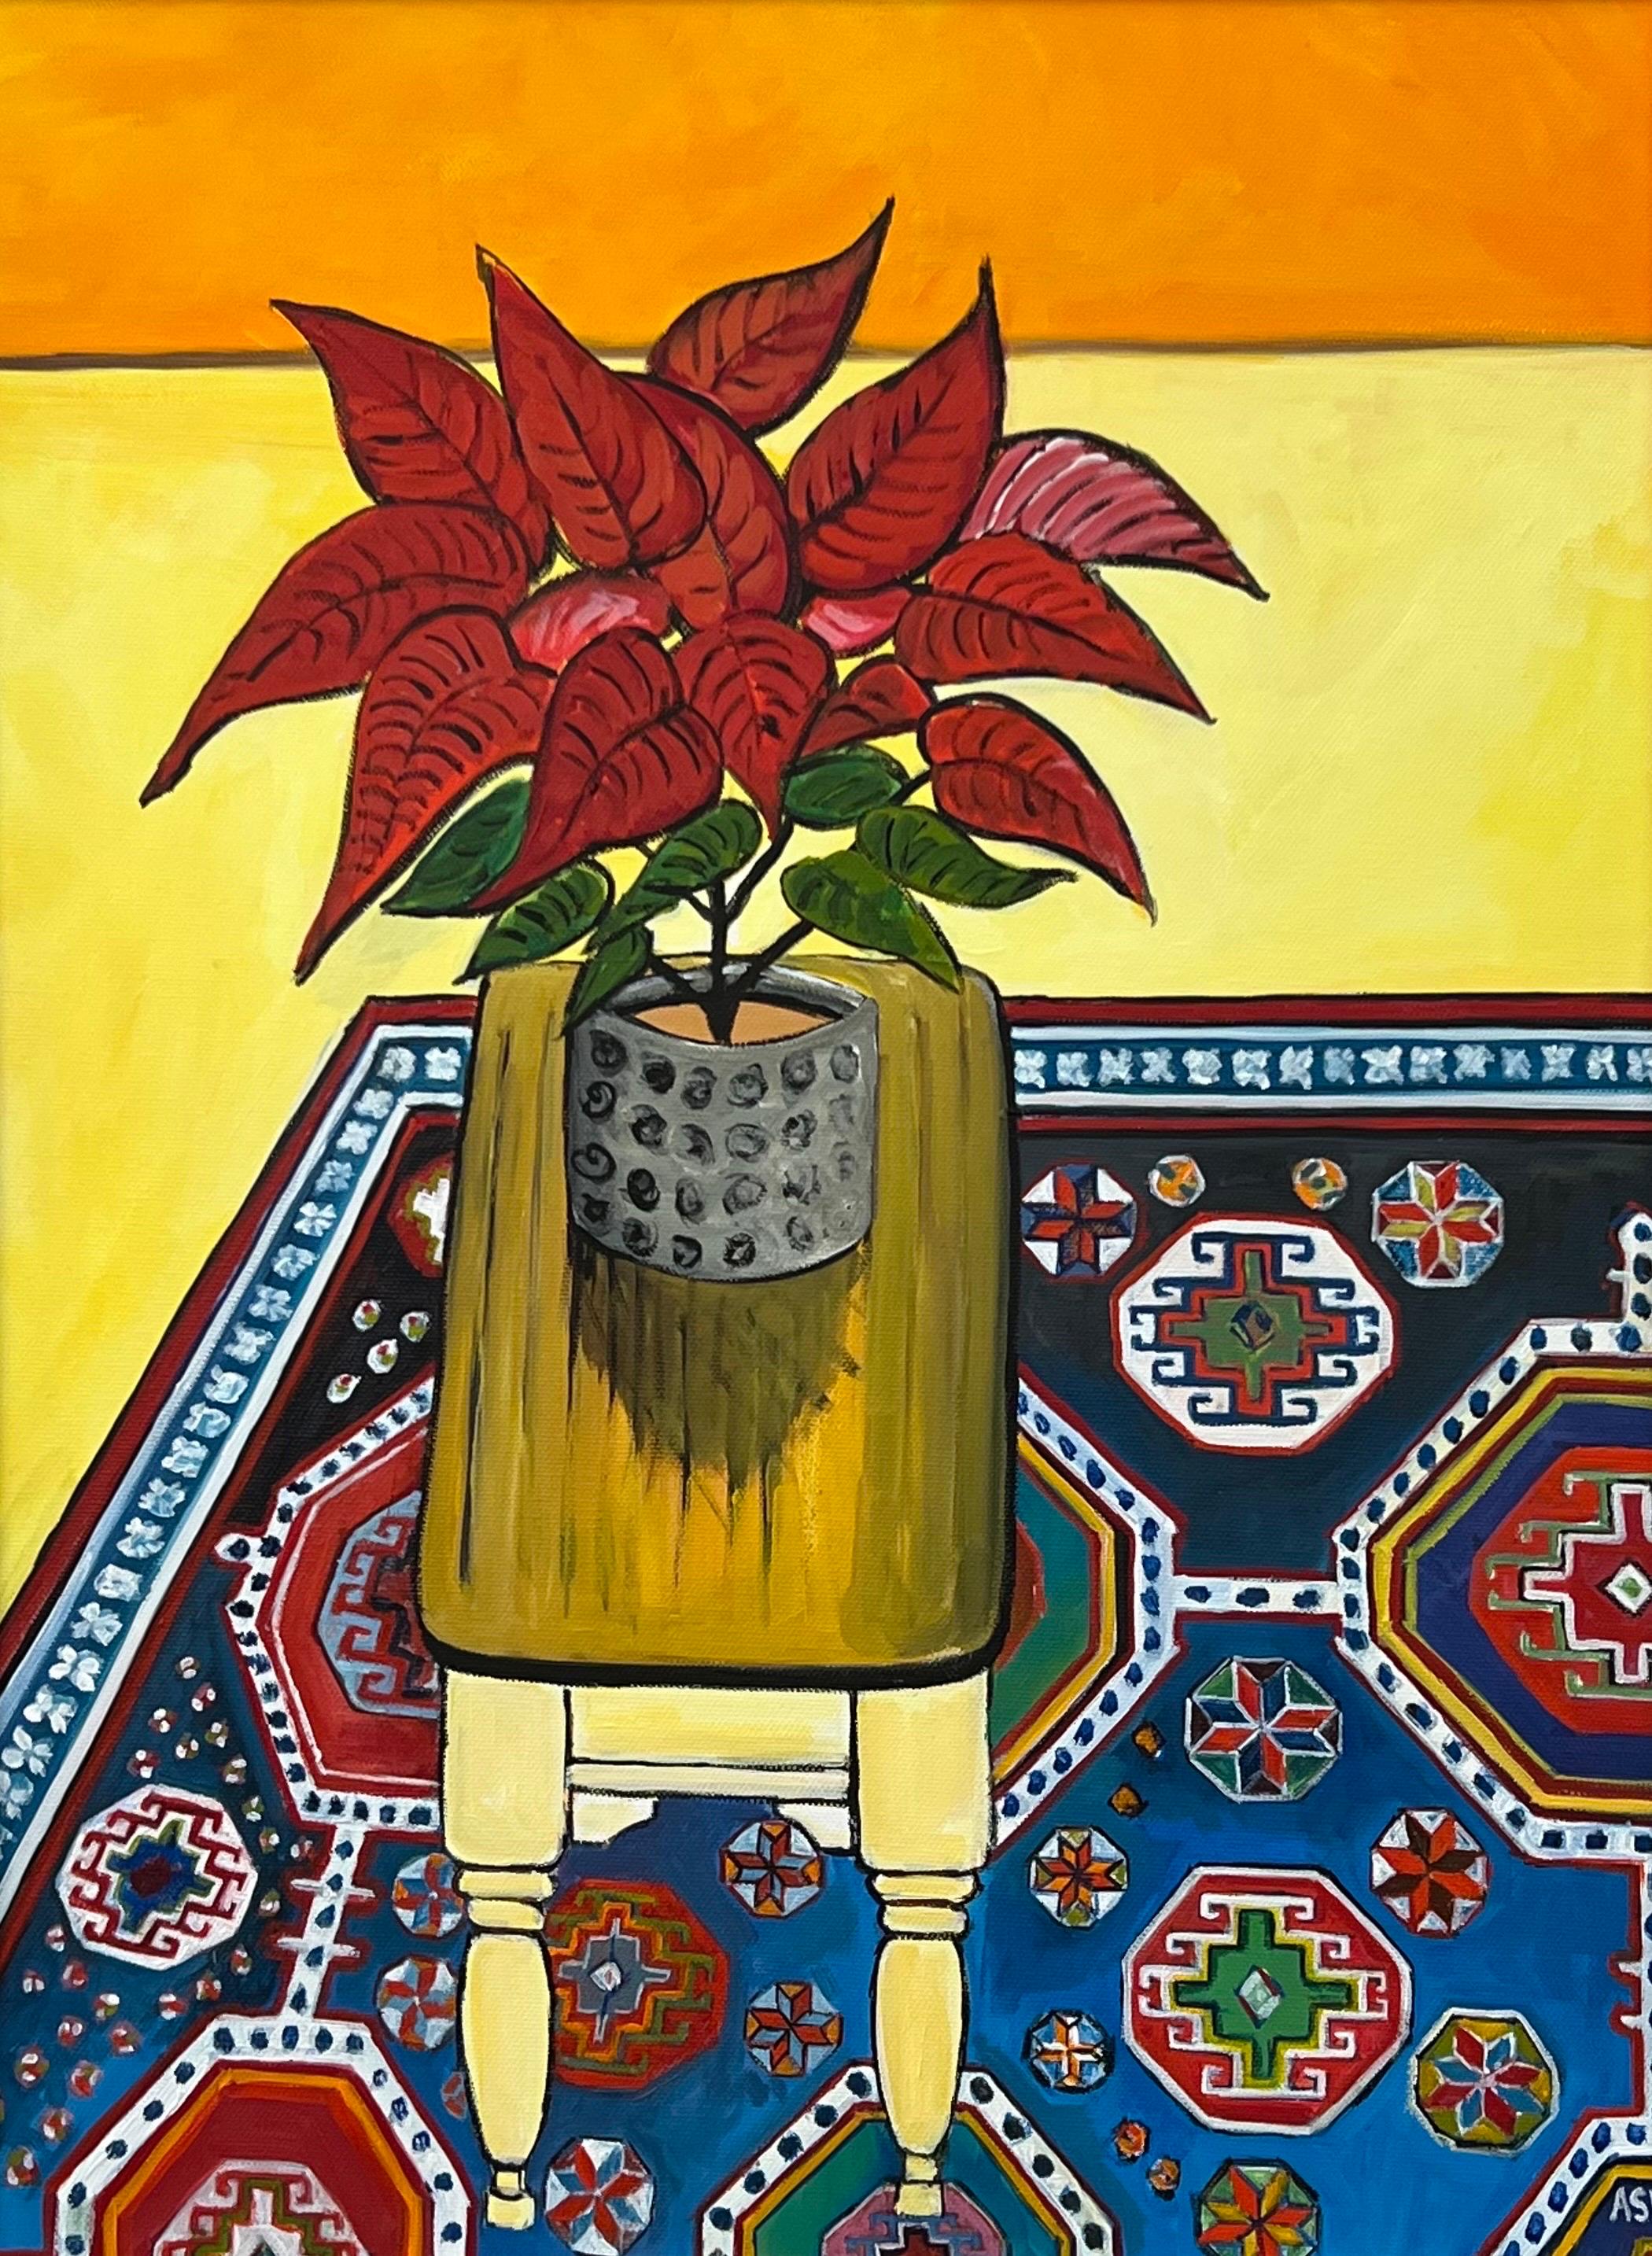 Still Life Painting of a Poinsettia Plant on a Persian Rug by British Artist For Sale 2